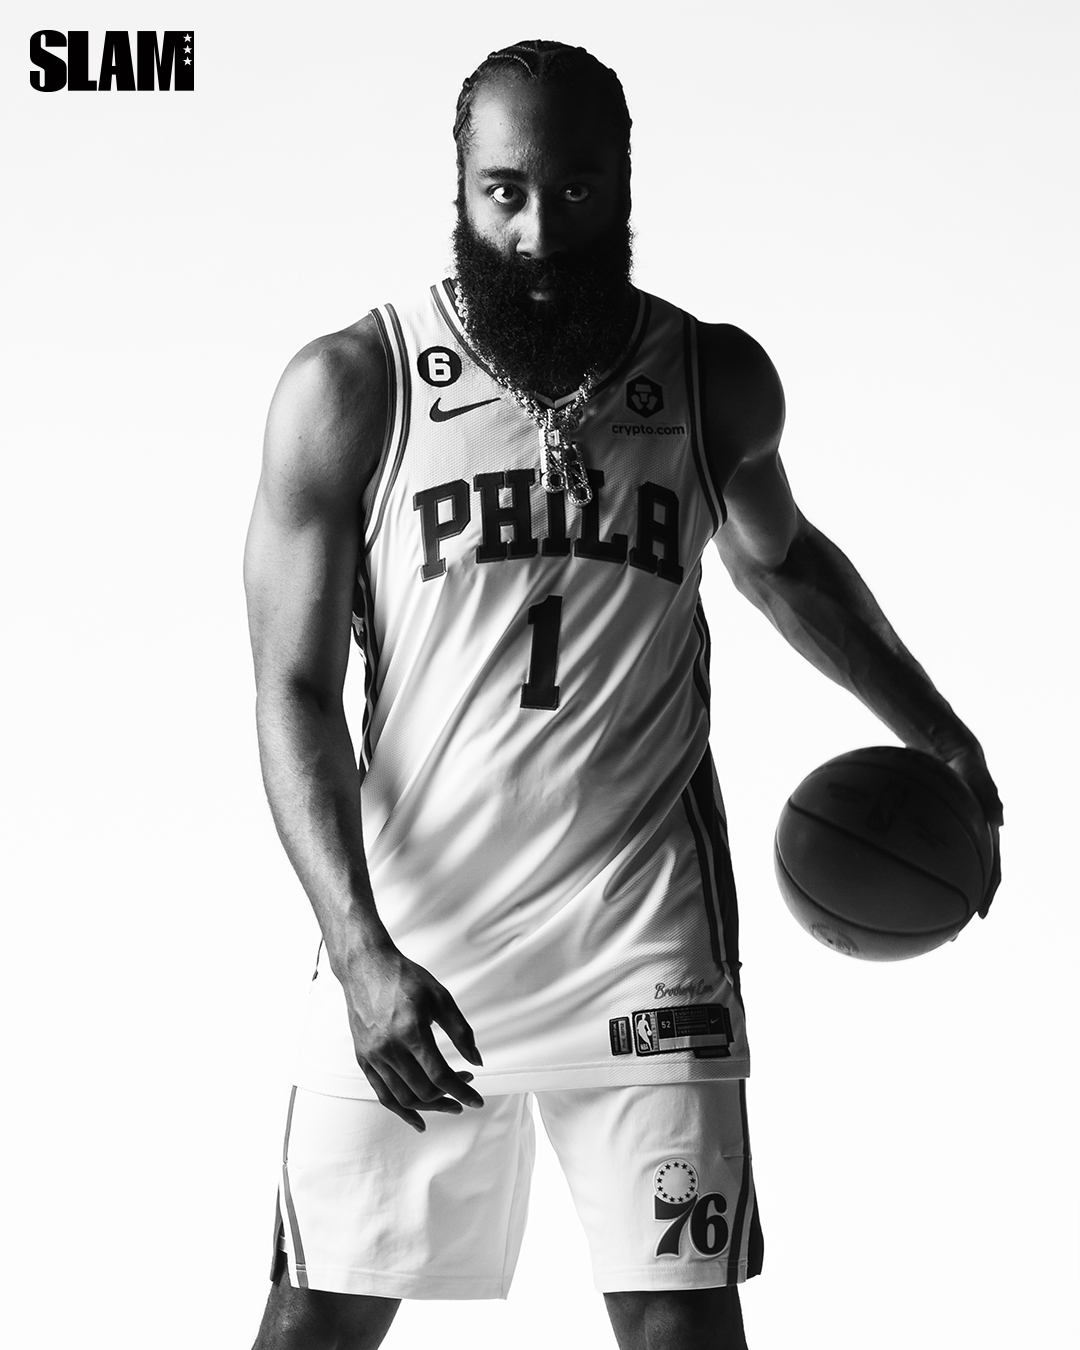 James Harden Opens Up About His Legacy and Being the ‘Biggest Innovator’ of the Game